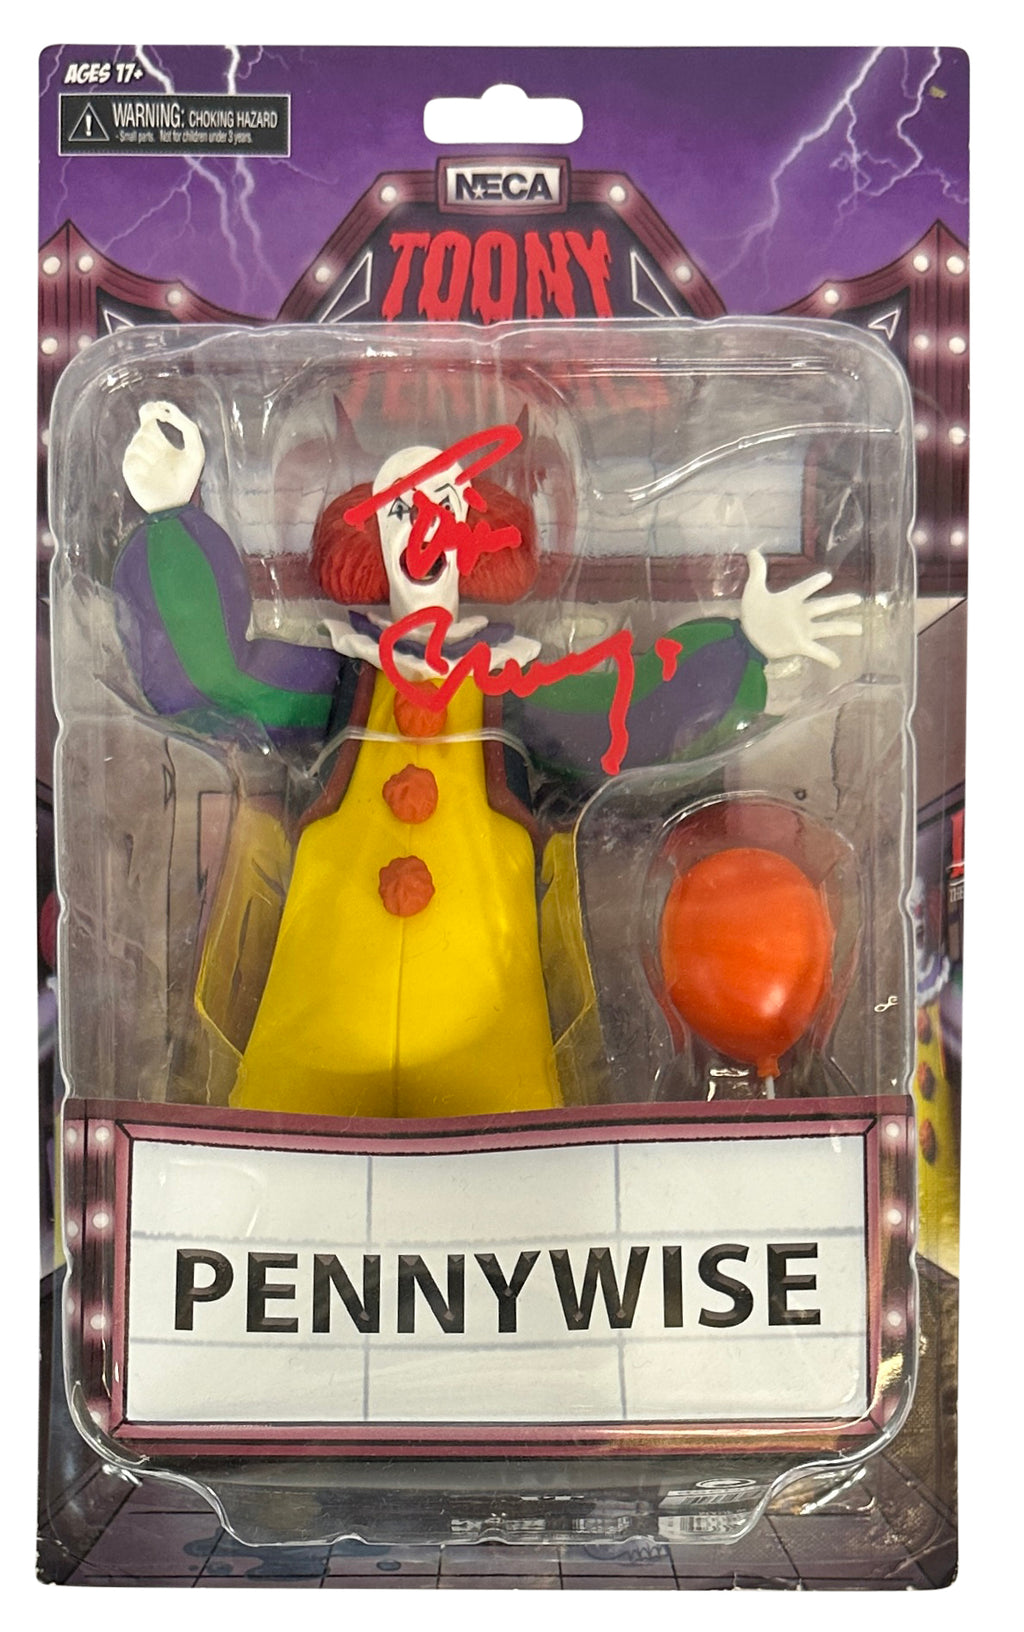 Tim Curry autographed signed NECA figure JSA COA IT Pennywise